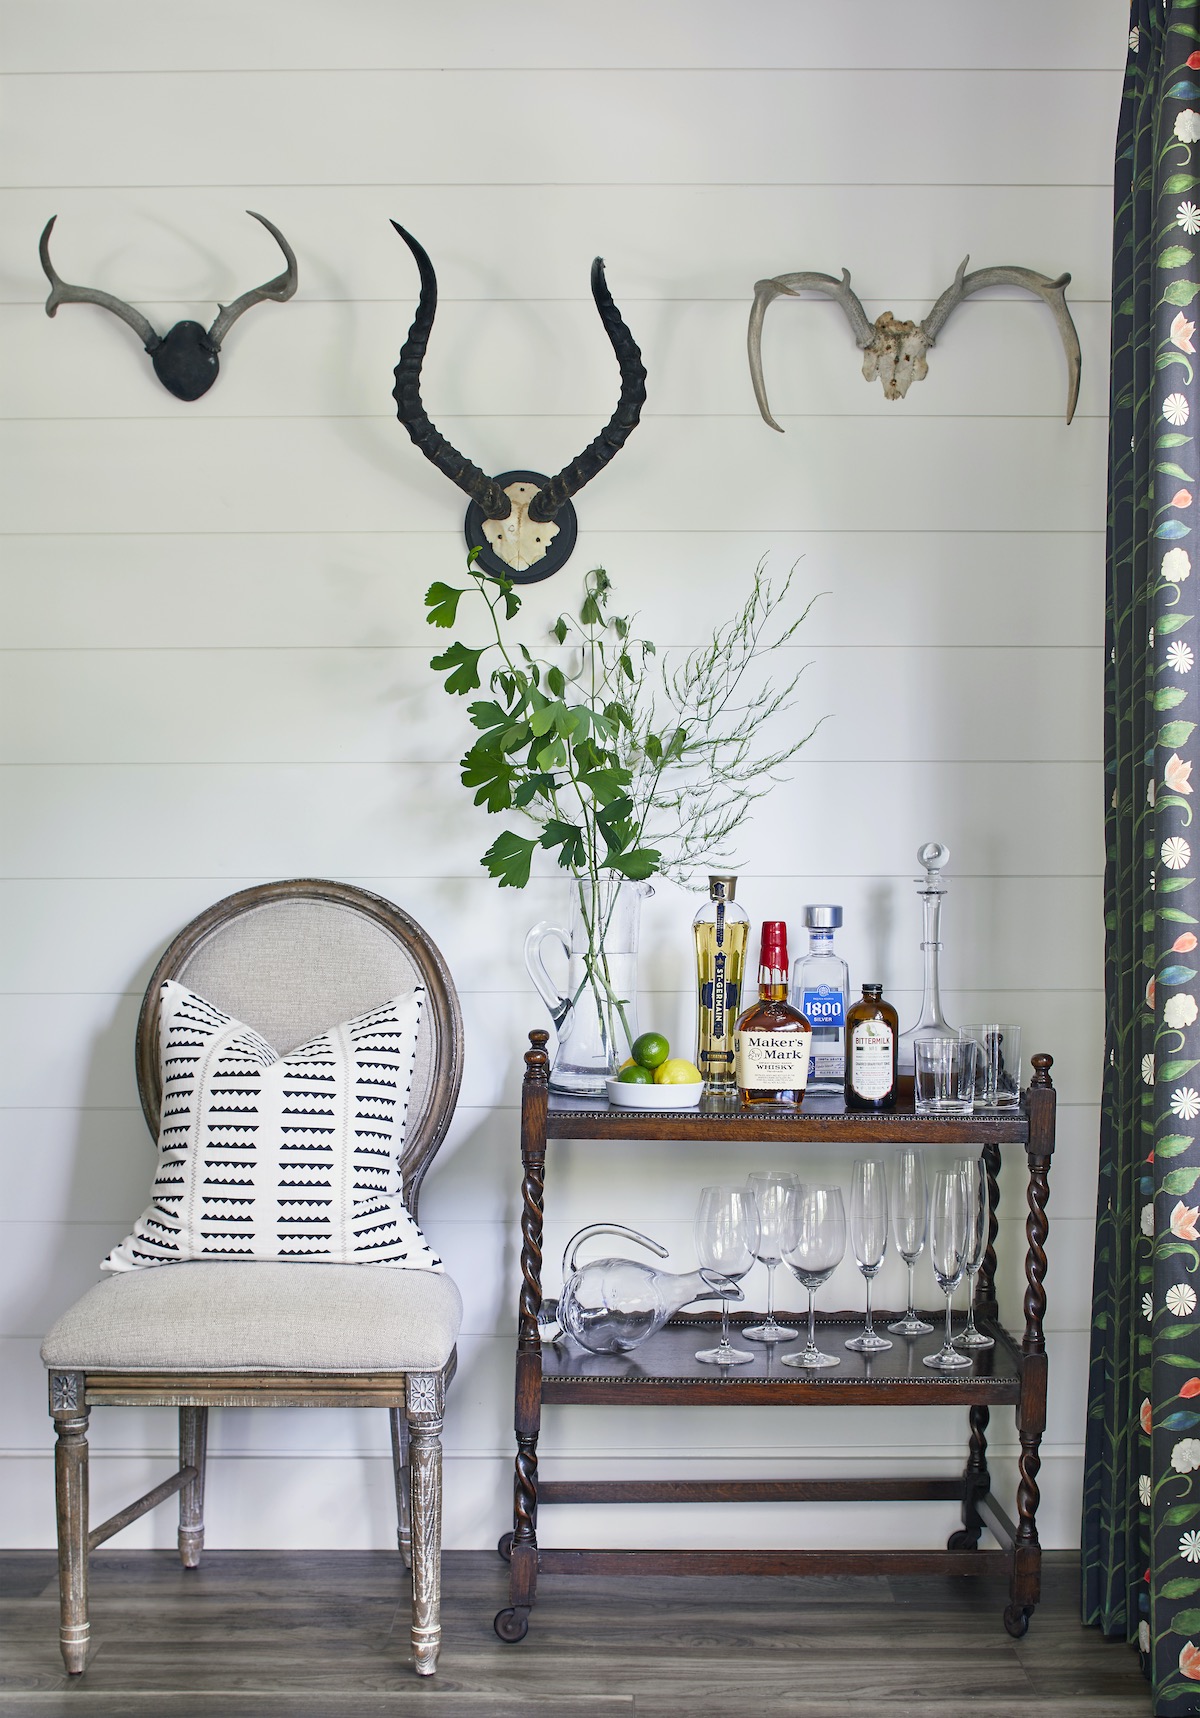 A set of three antlers hang above a chair and wet bar.